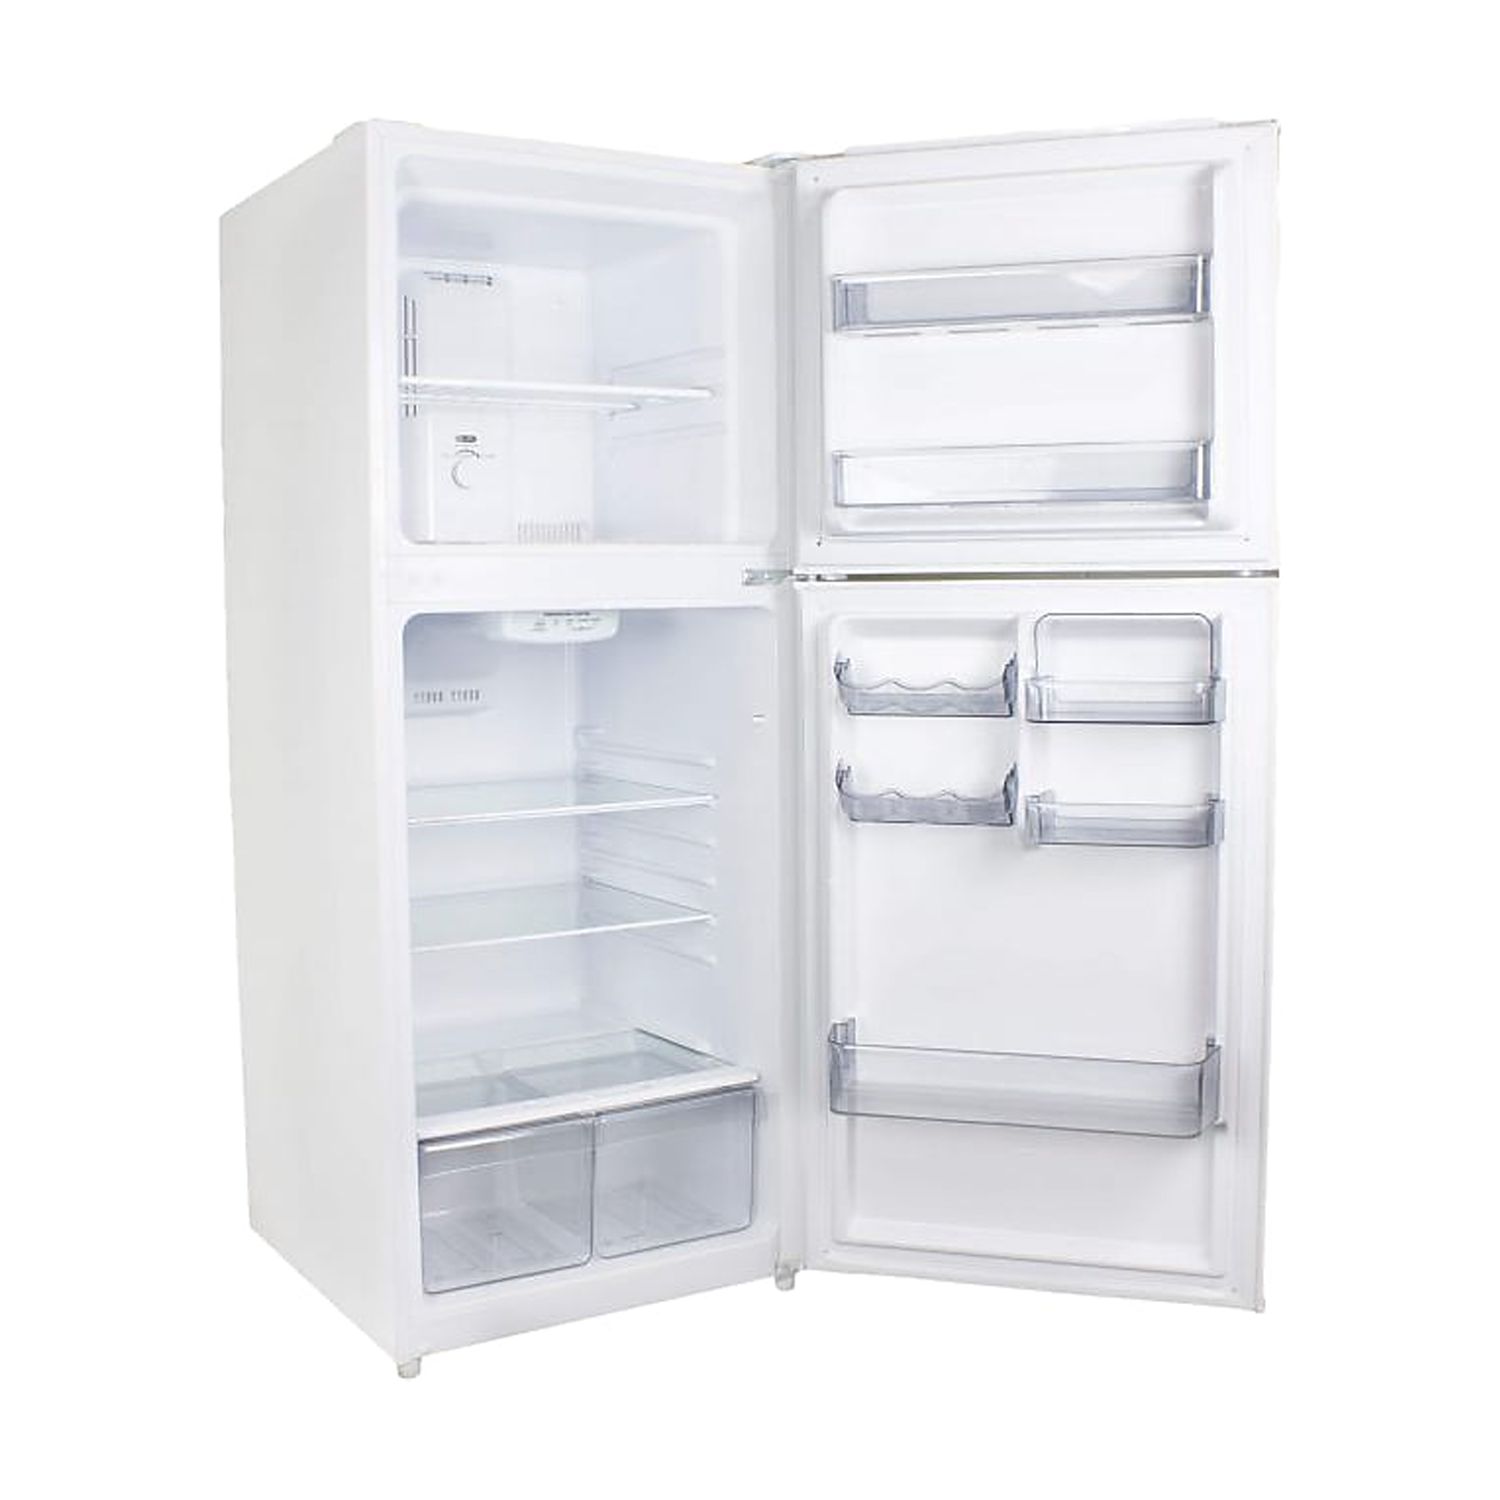 Danby 10.1 cu. ft. Apartment Size Refrigerator, White - image 2 of 9